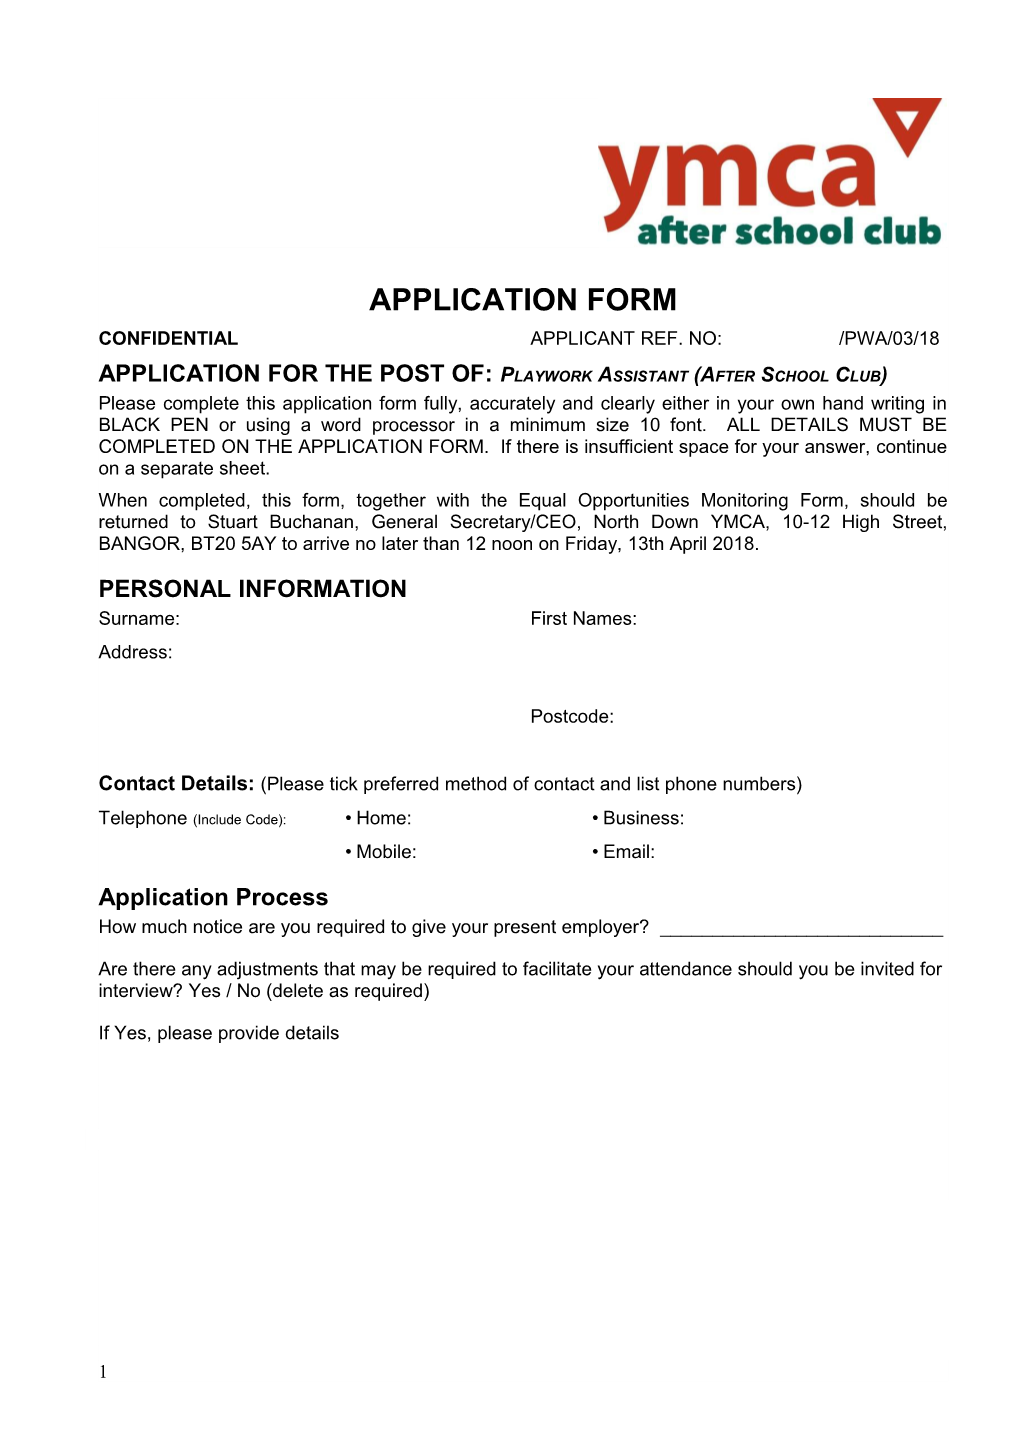 APPLICATION for the POST OF: Playwork Assistant (After School Club)